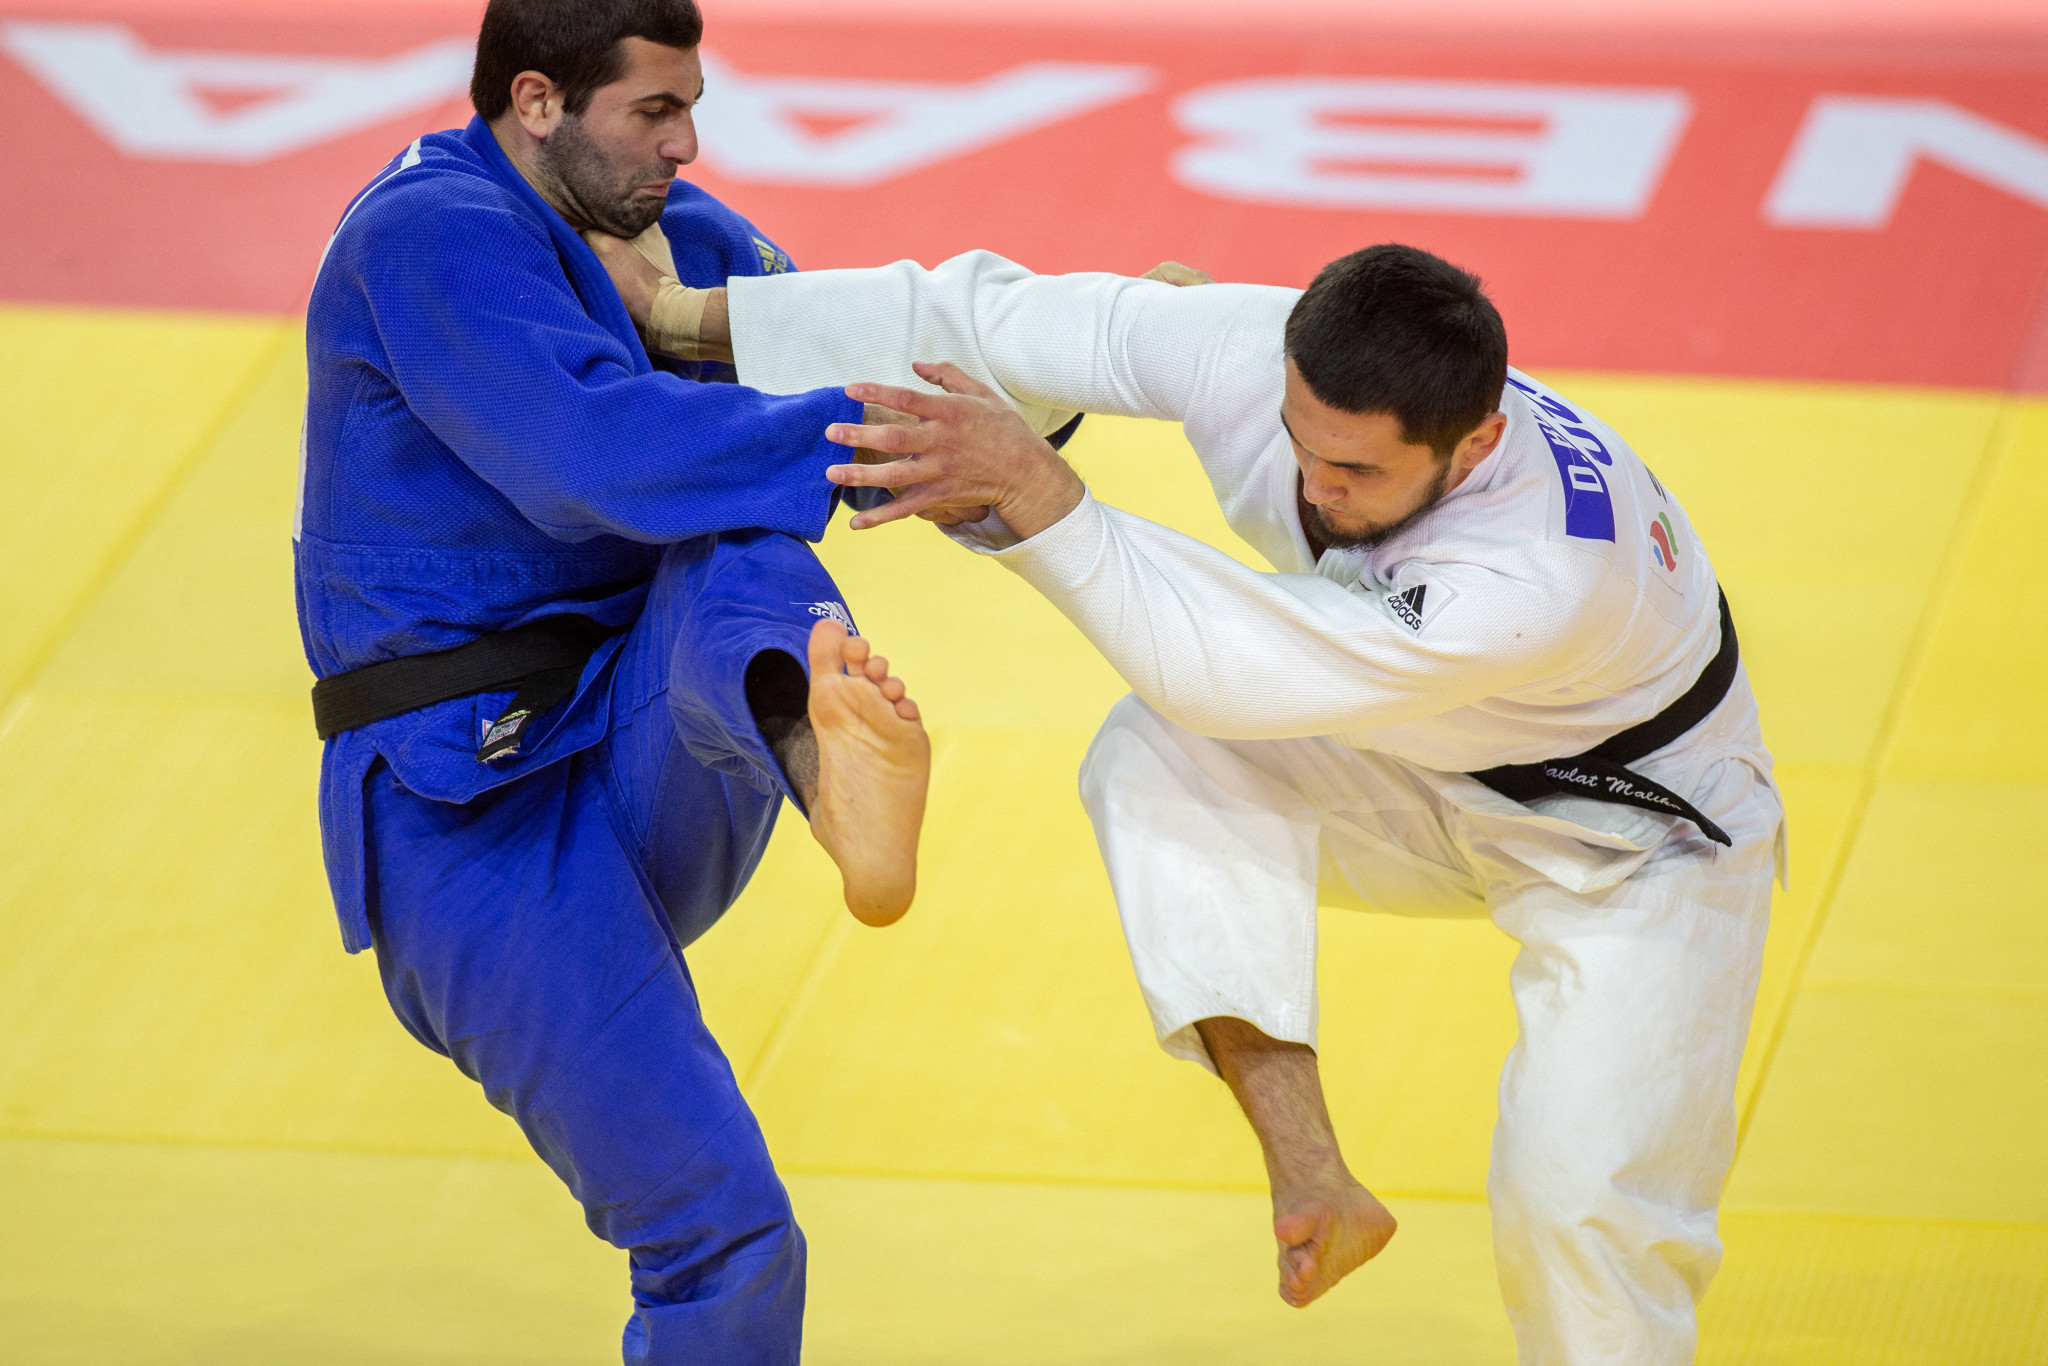 Judo is one of the sports where Russian athletes have been allowed to compete under a neutral flag ©Getty Images